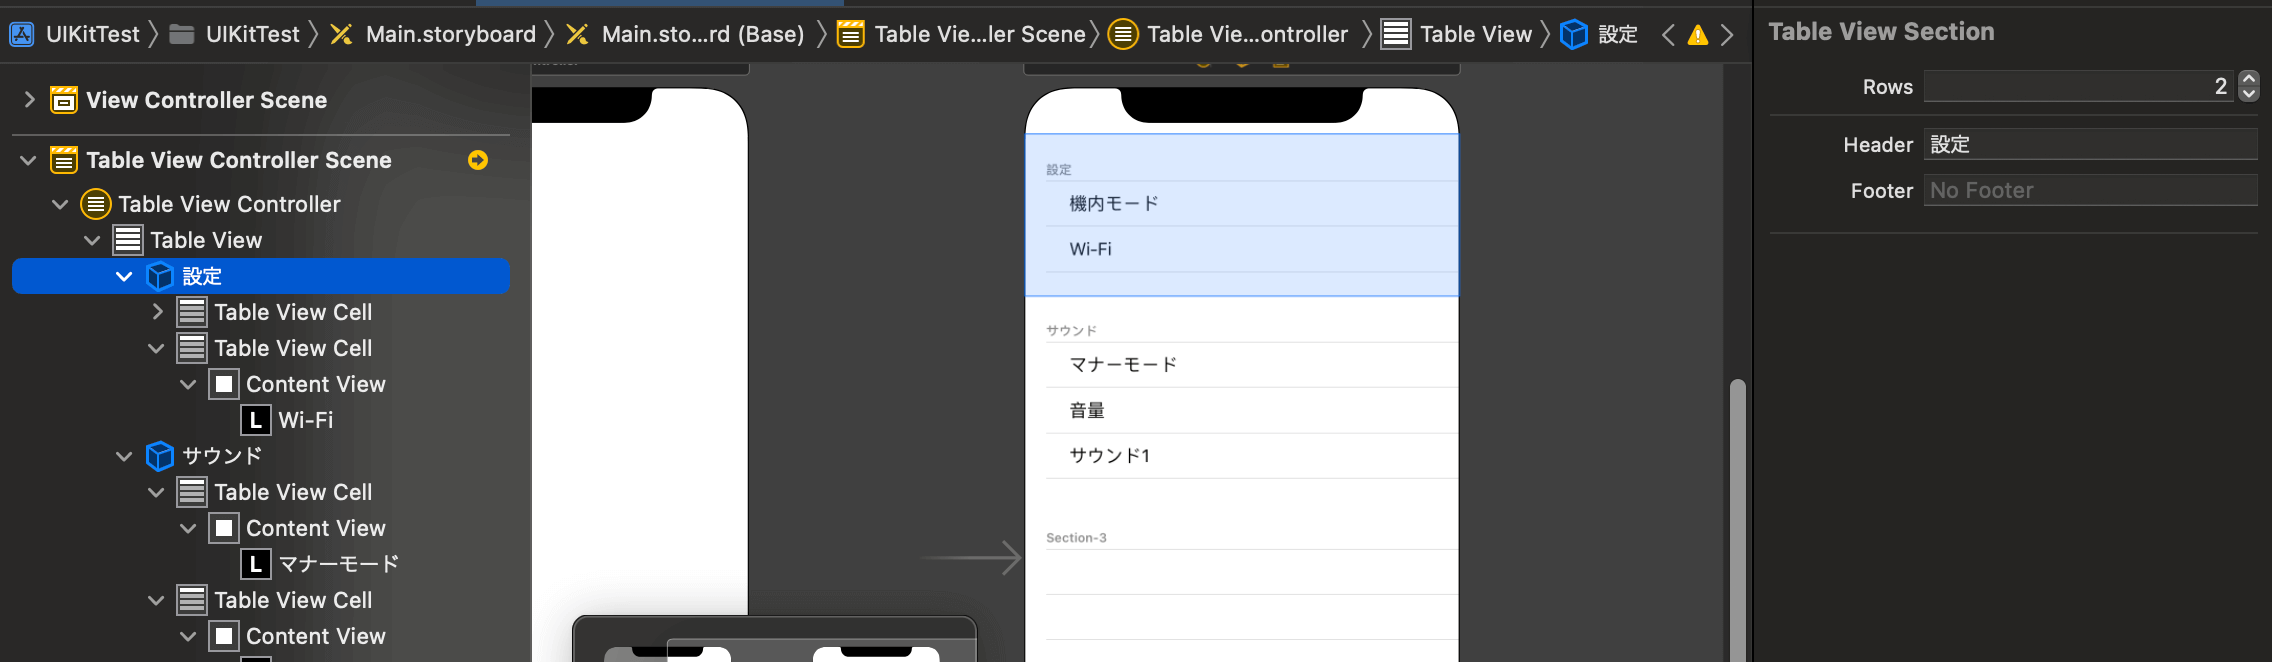 【Swift UIKit】TableViewControllerのStaticCell の使い方と注意点